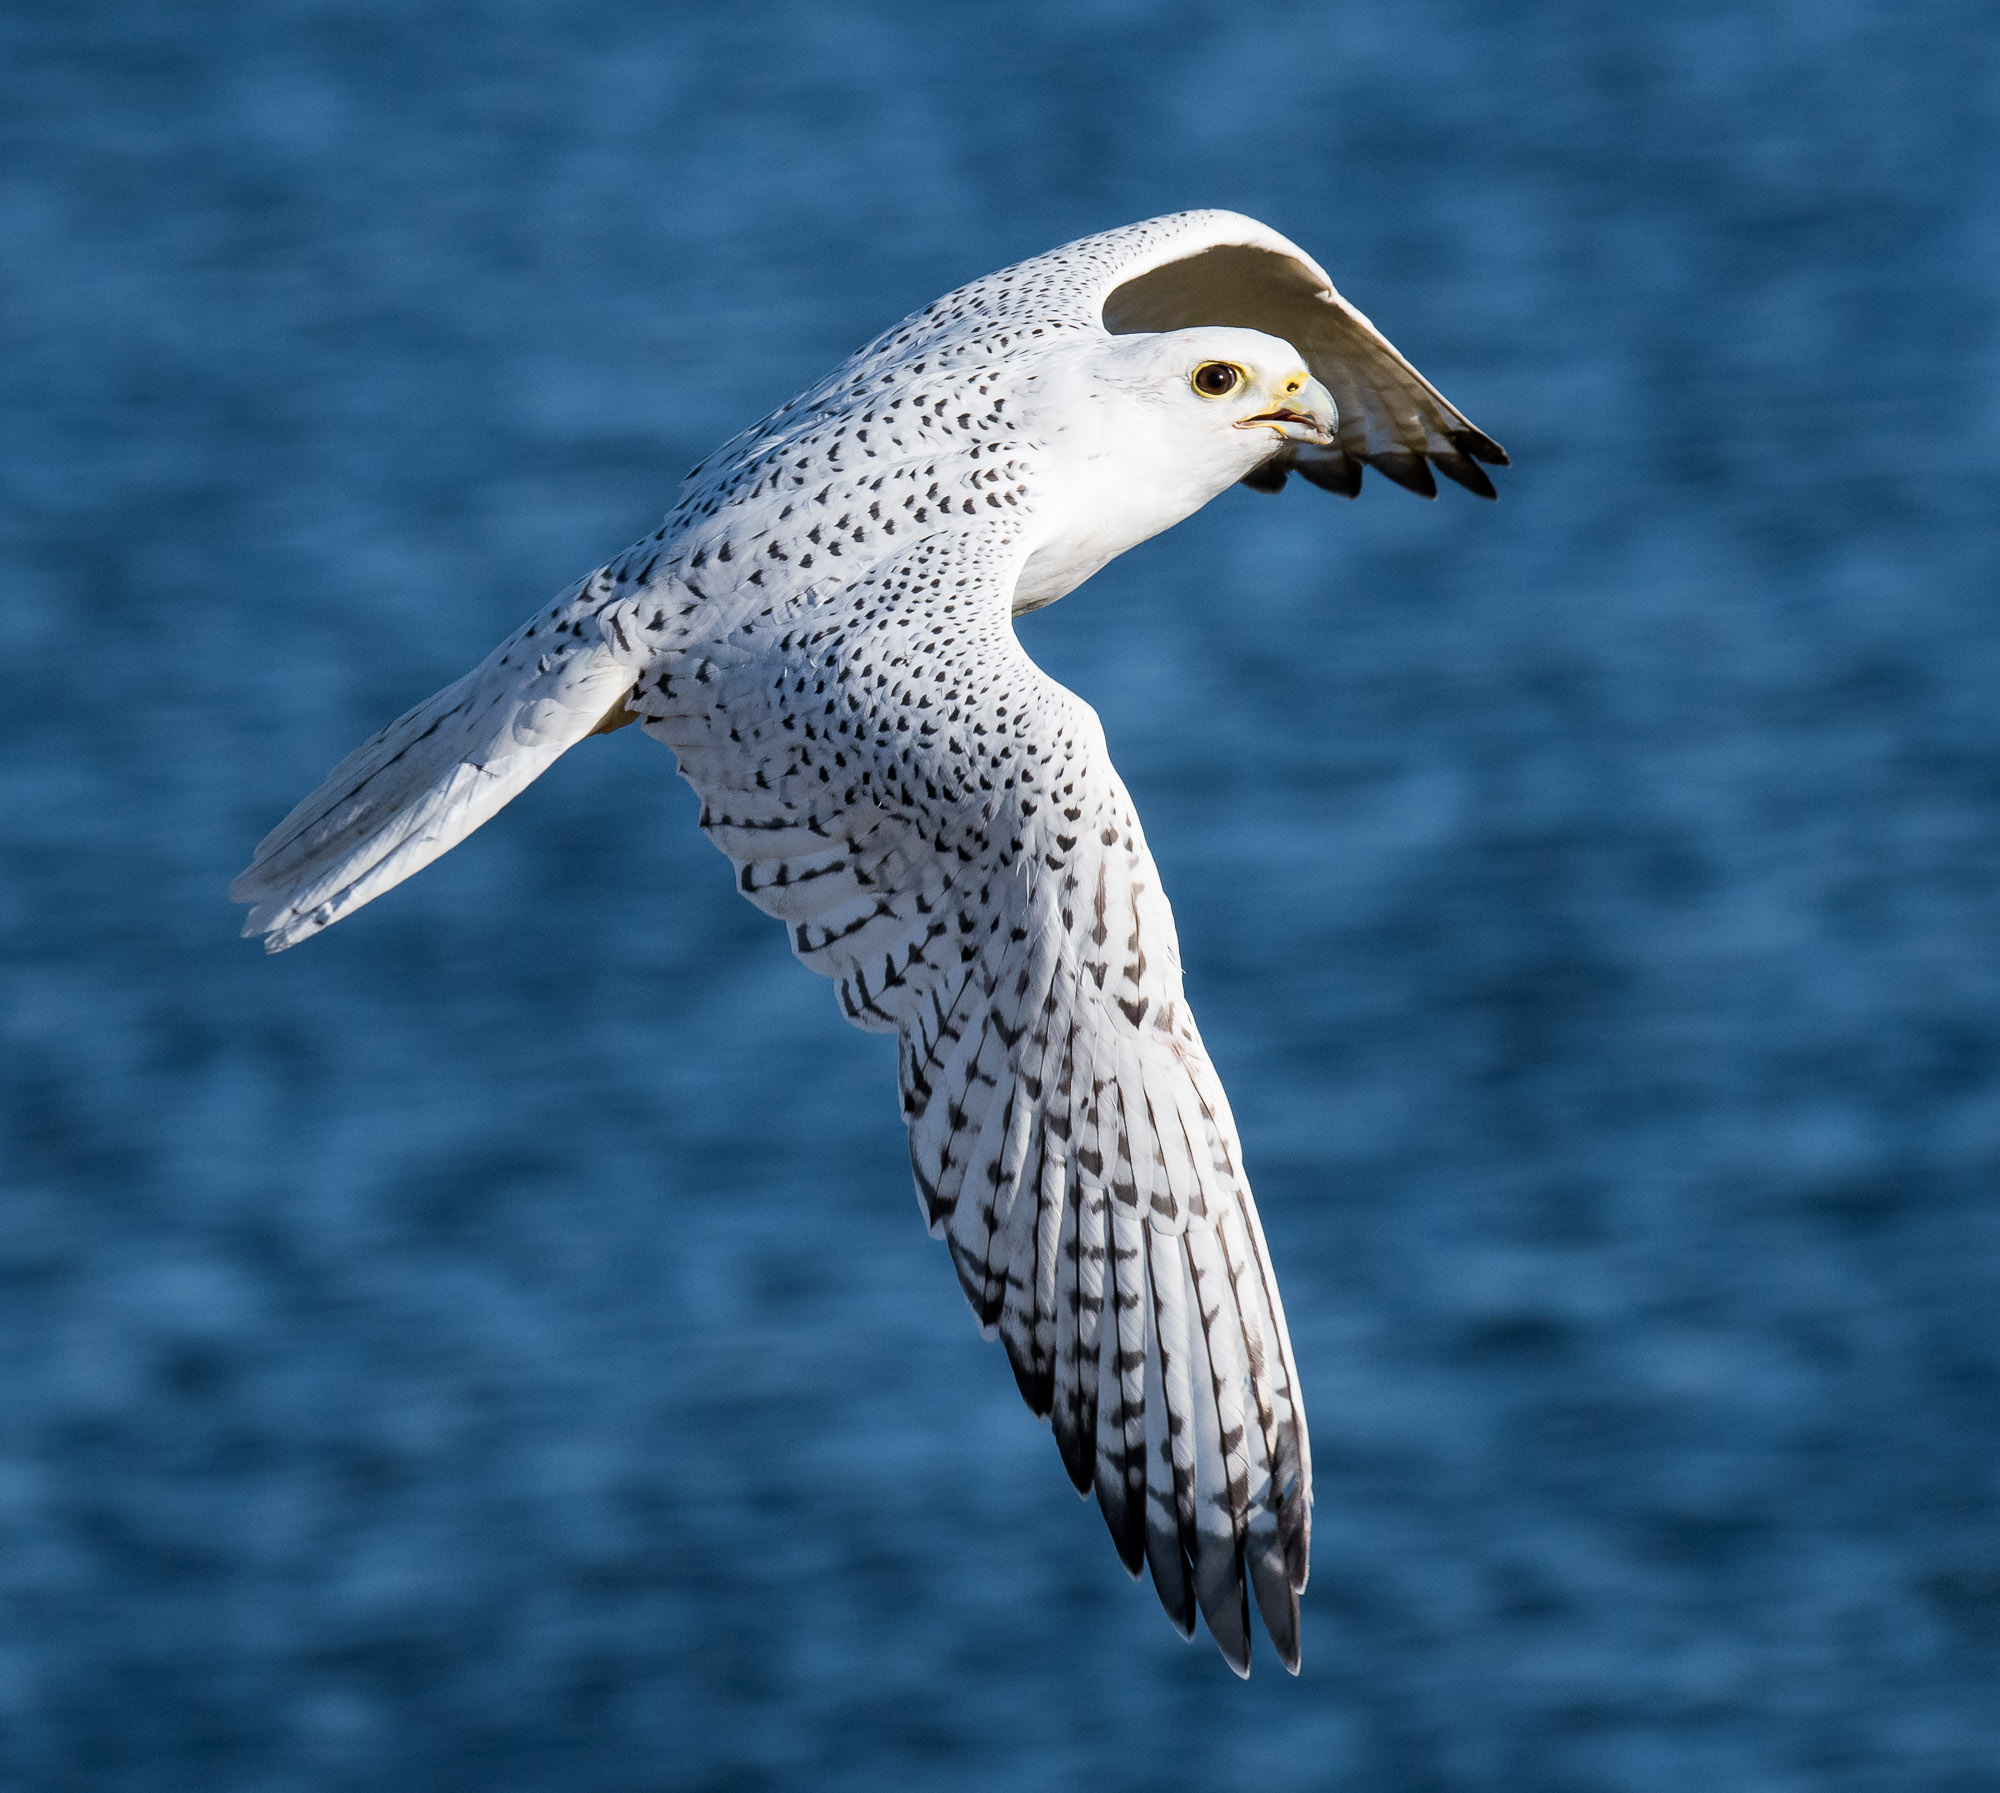 Gyrfalcon flying over lake - Boulder, Colorado - Fred Wasmer Photography